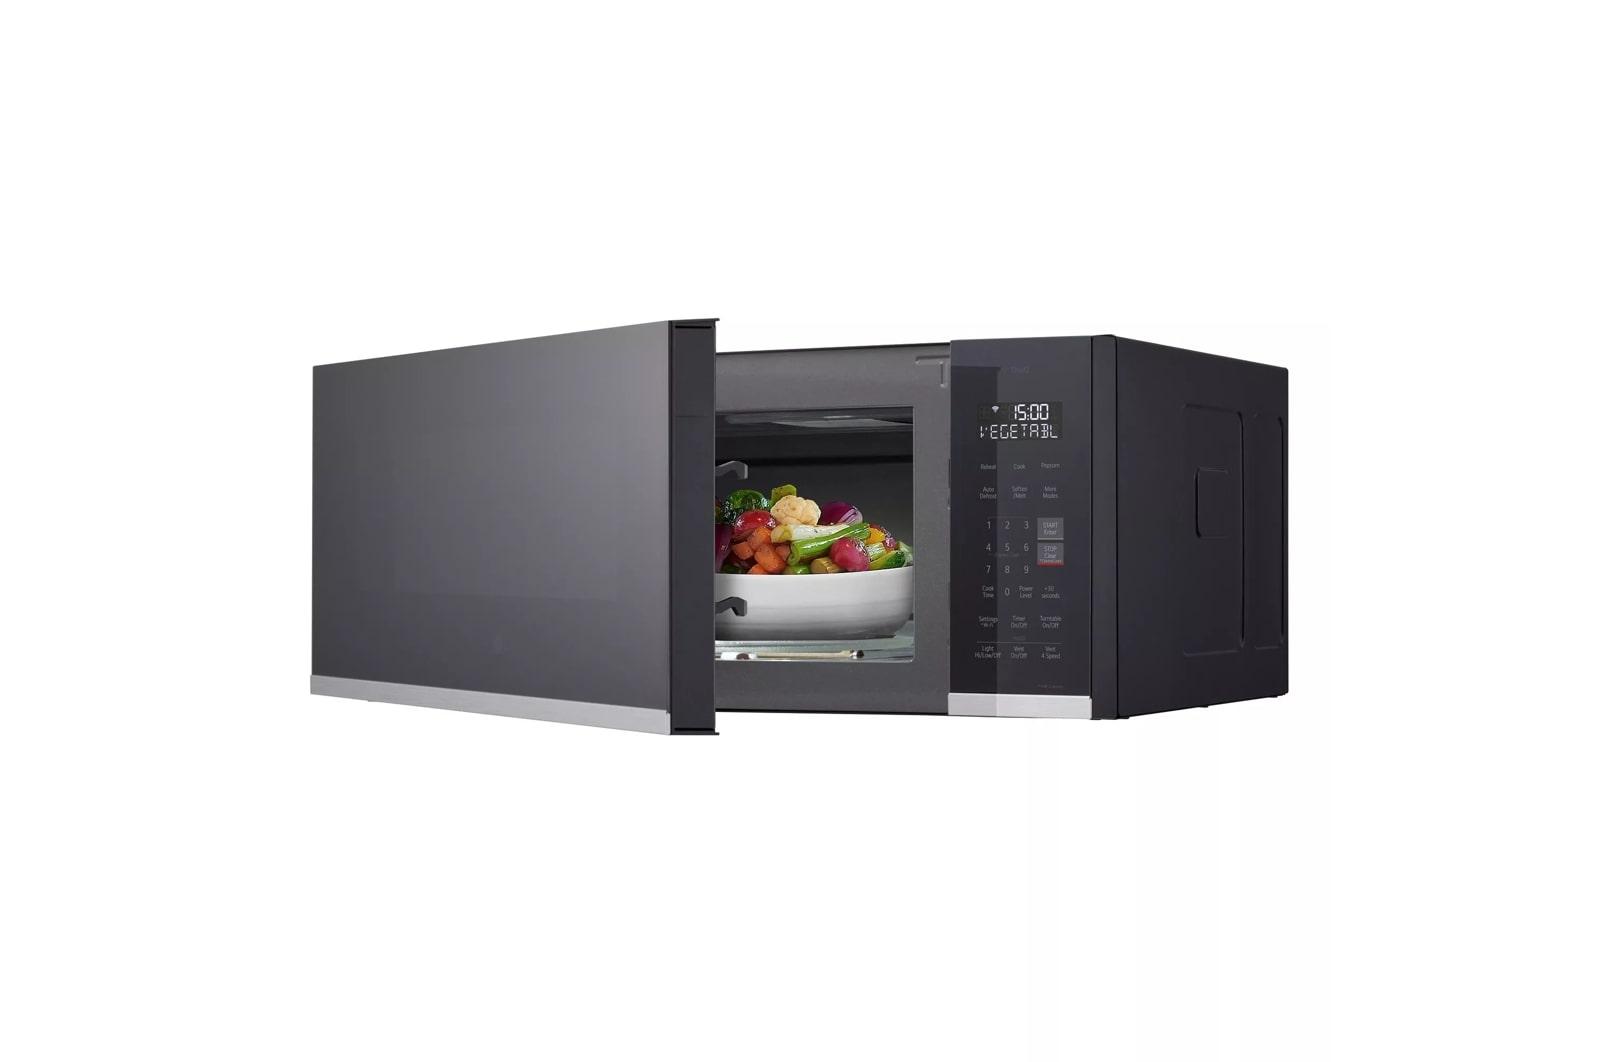 Lg 1.3 cu. ft. Smart Low Profile Over-the-Range Microwave Oven